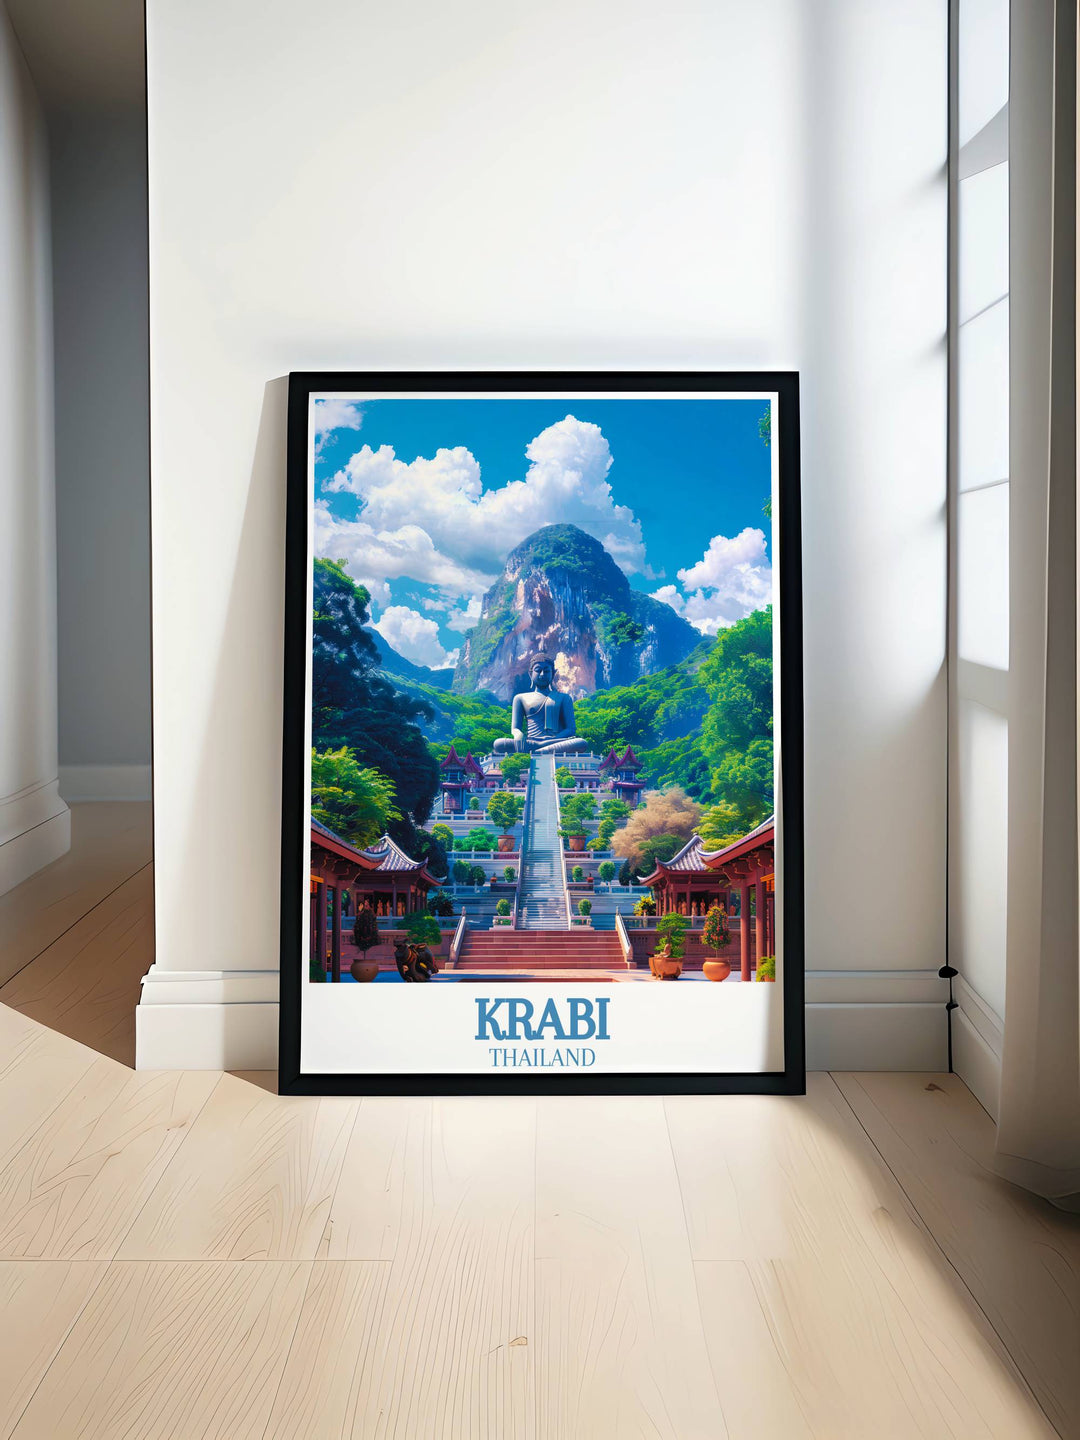 Experience the serene beauty of Krabi Island and the mystique of Tiger Cave Temple with this stunning wall art print featuring lush landscapes and spiritual architecture perfect for enhancing your home decor or giving as a thoughtful Thailand travel gift.